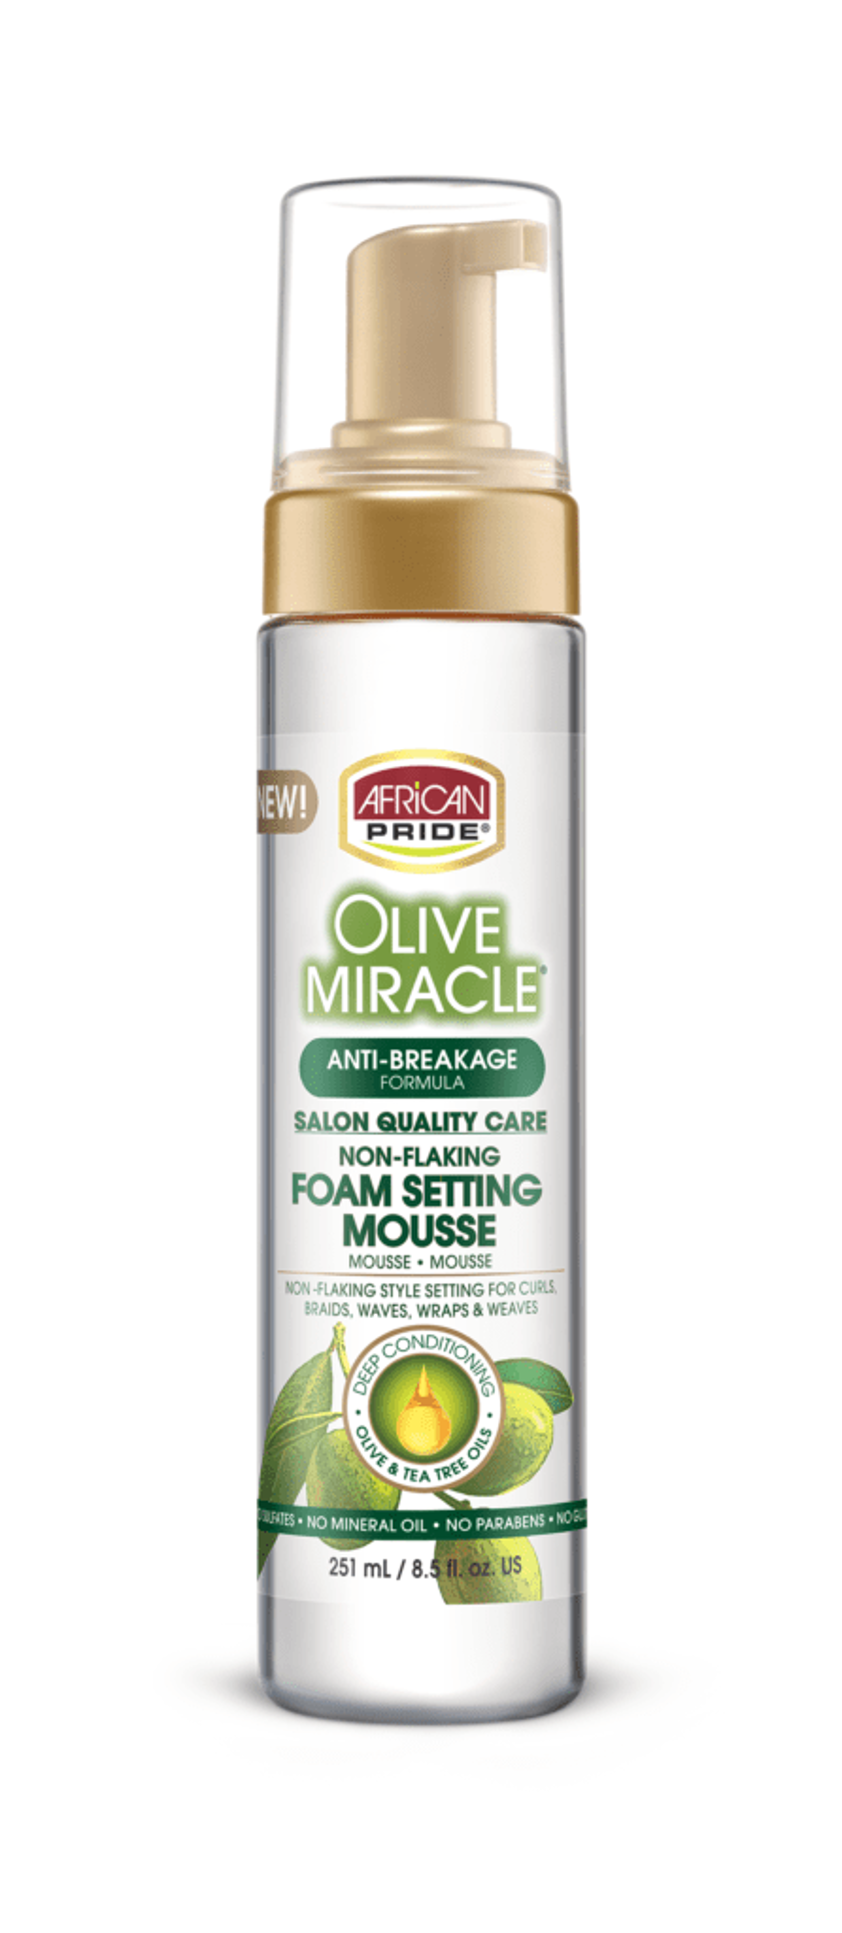 AFRICAN PRIDE OLIVE MIRACLEANTI BREAKAGE FOAM SETTING MOUSSE